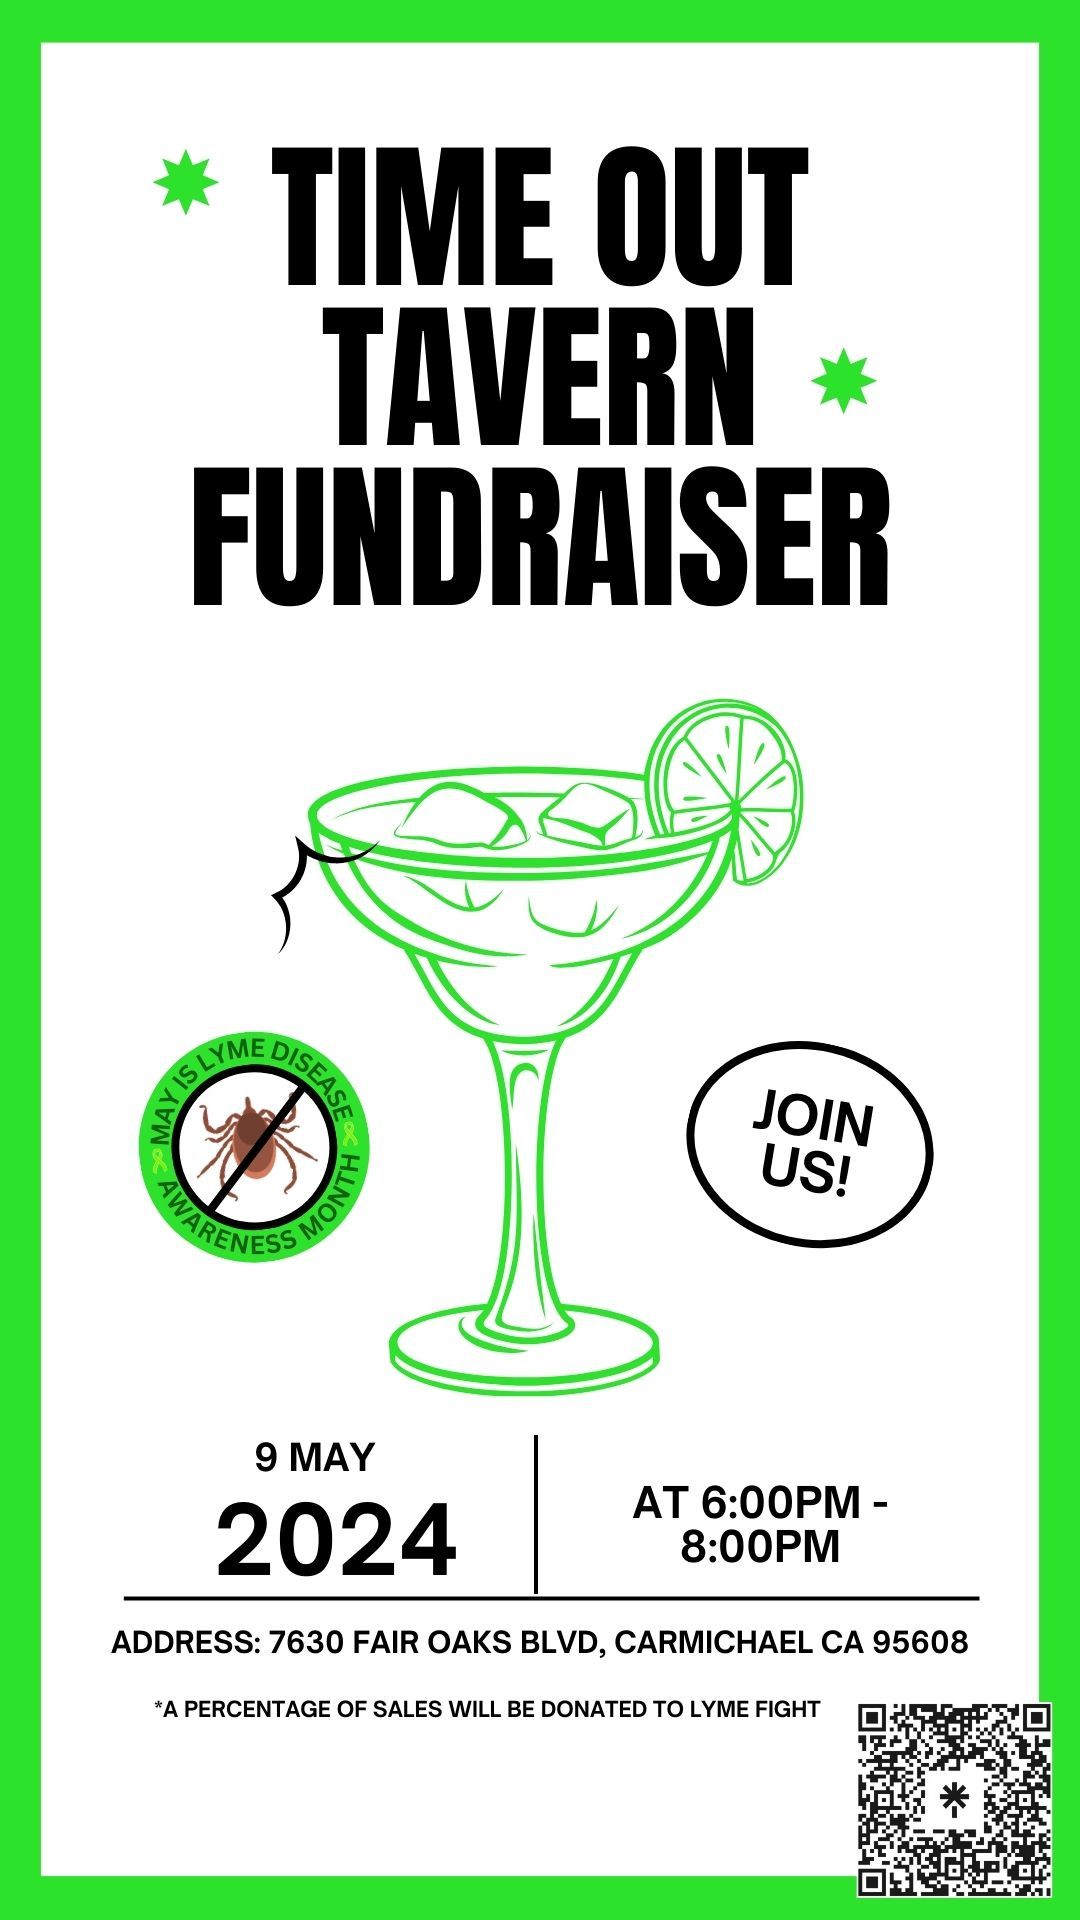 Lyme Fight Foundation Fundraiser at Time Out Tavern